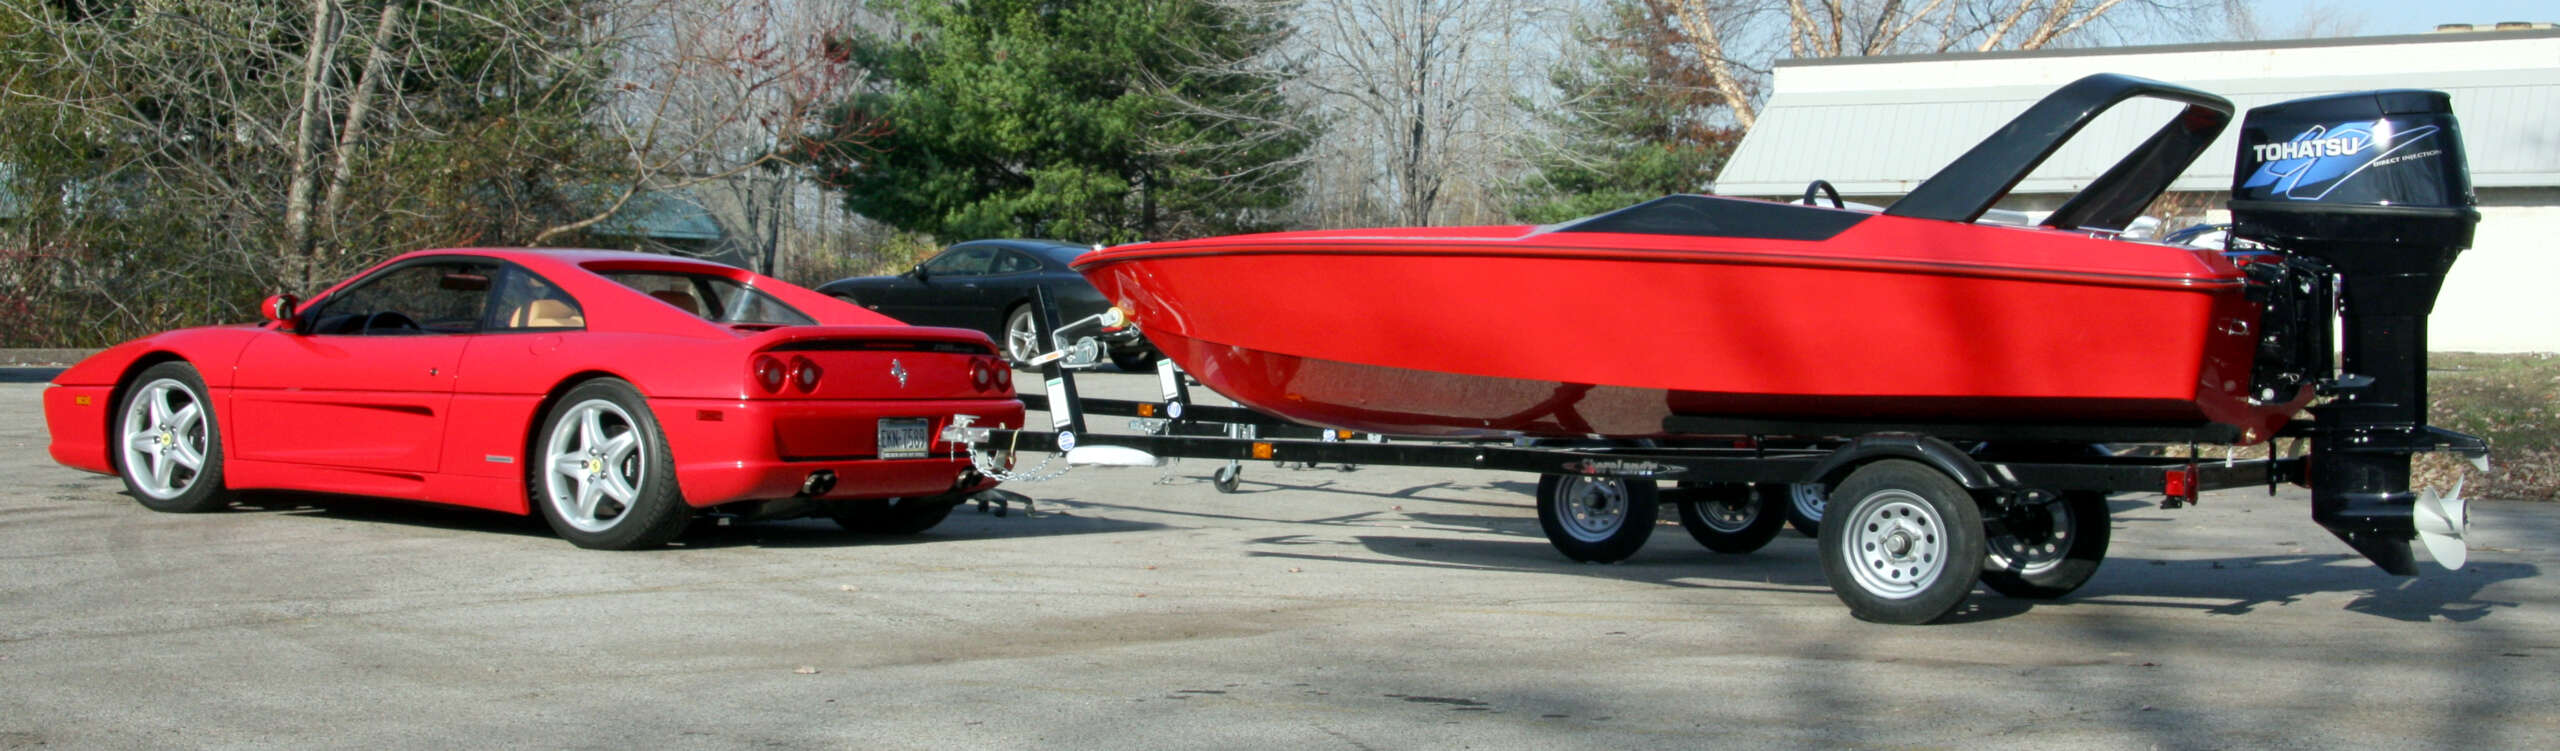 X-15 Red Boat Tow